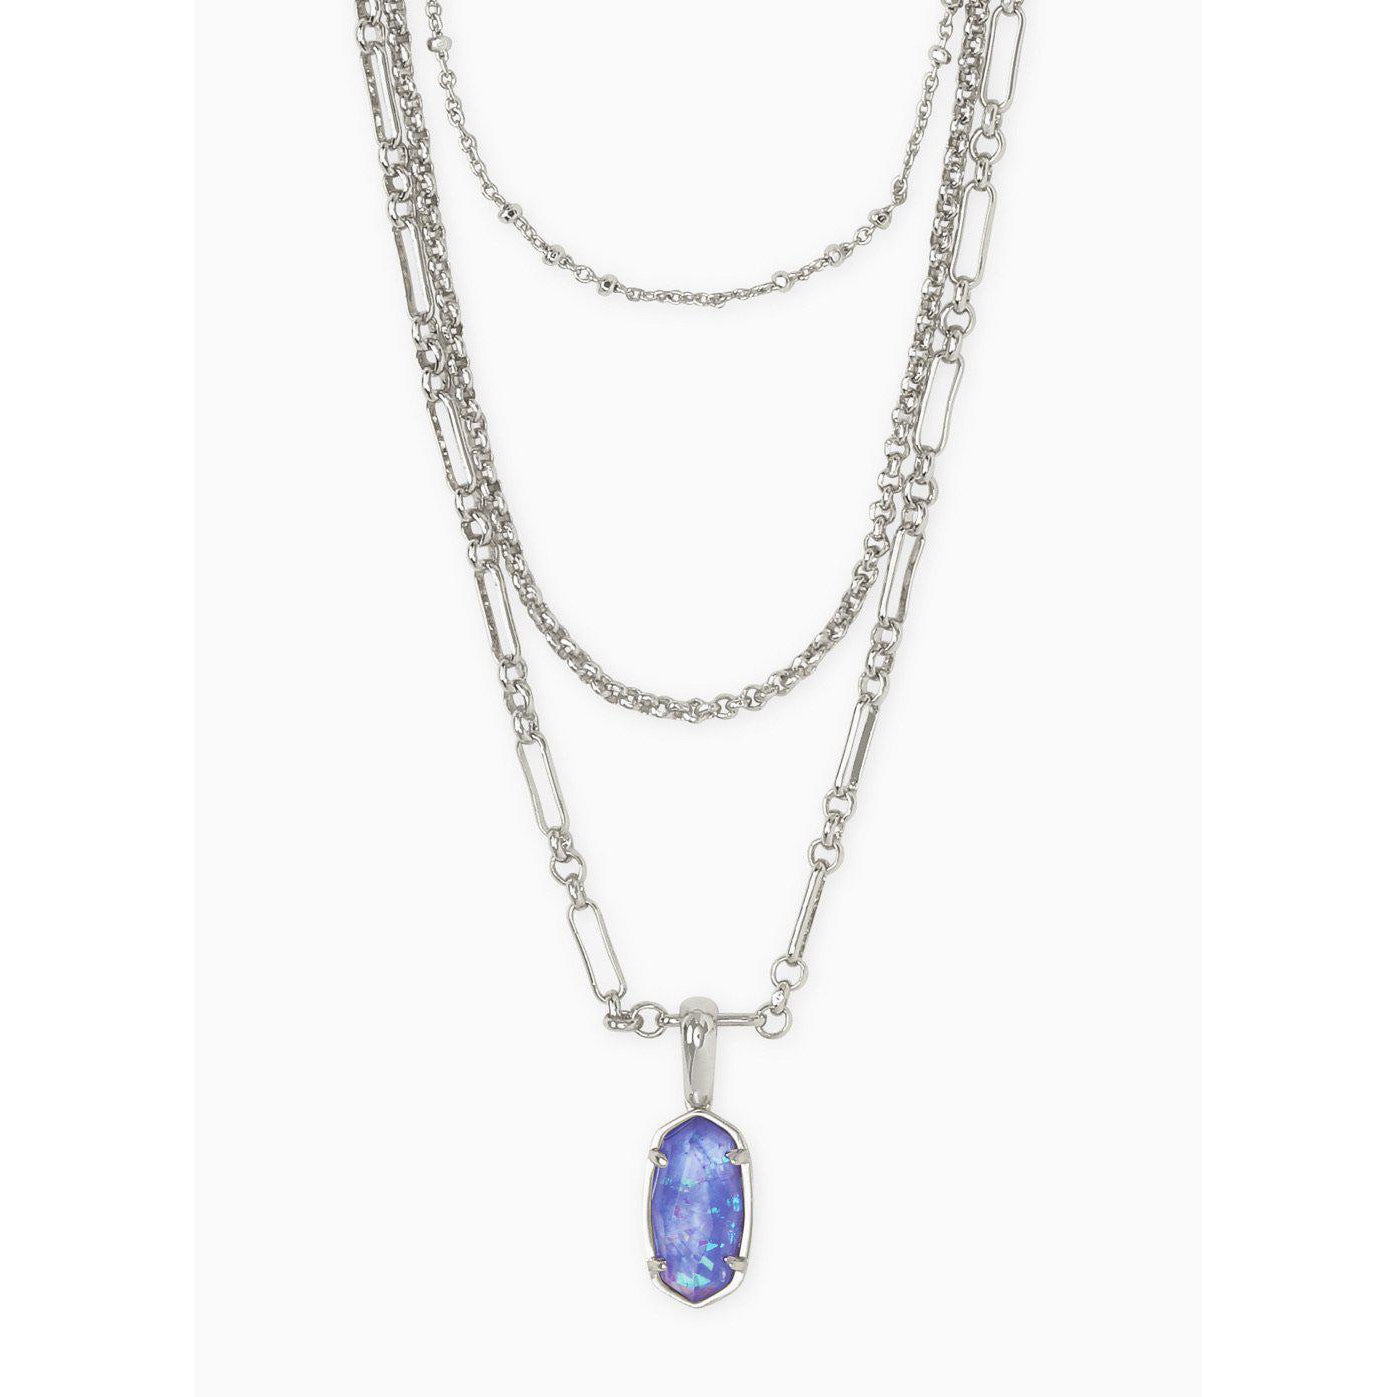 Elisa Triple Strand Necklace in RHOD Iridescent Lilac Illusion